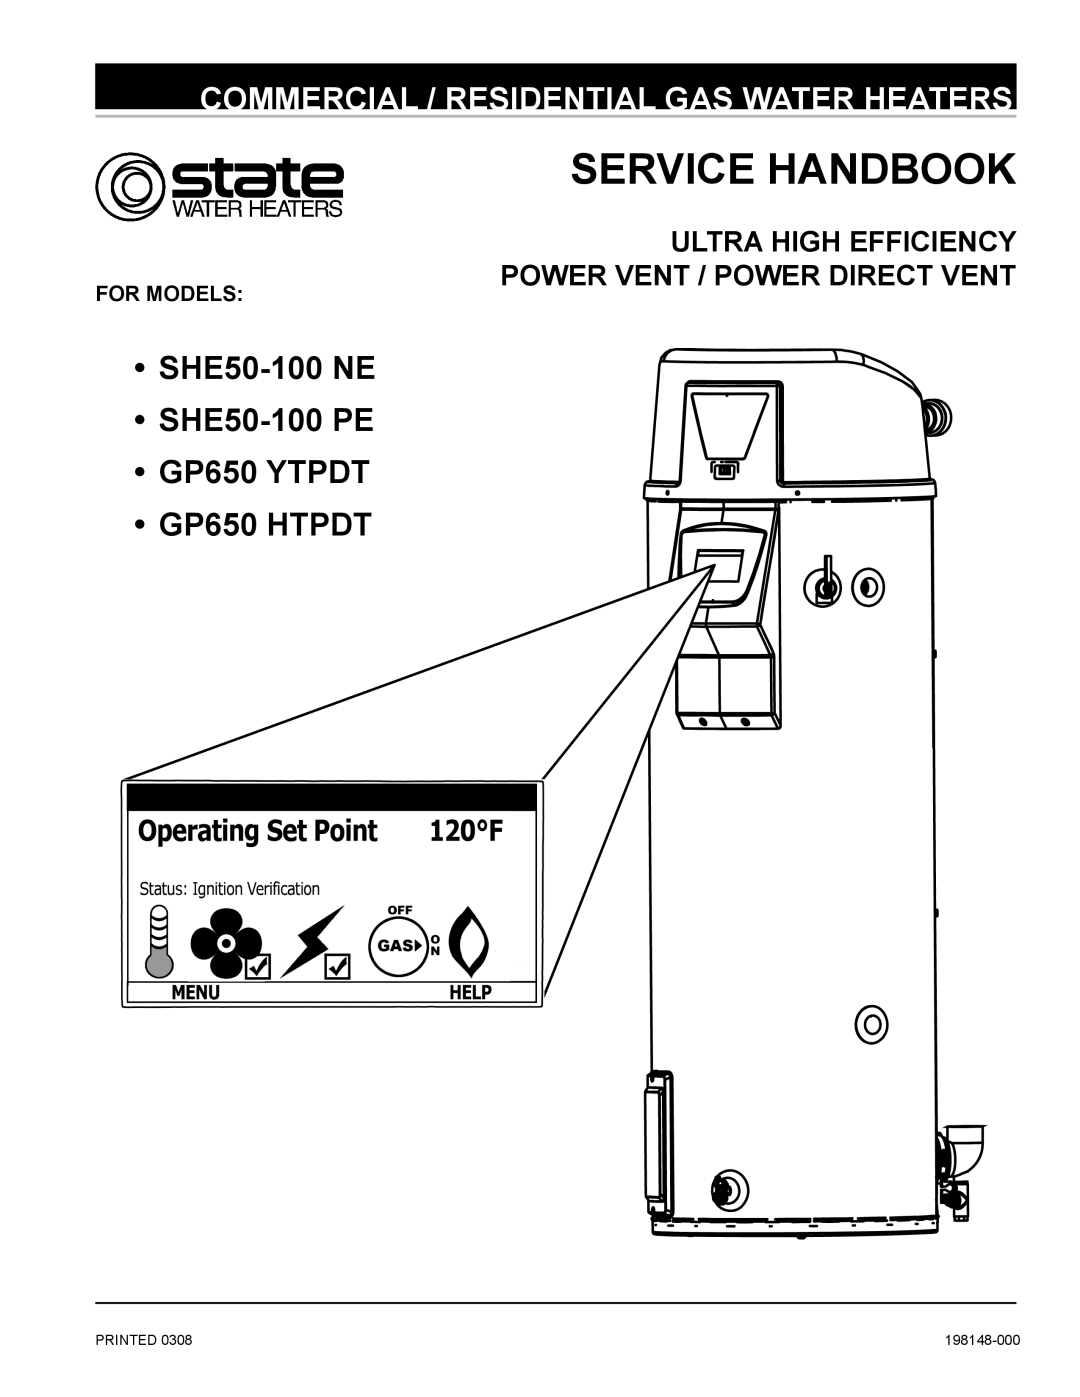 State Industries SHE50-100NE manual For Models, Service Handbook, Commercial / Residential Gas Water Heaters, •GP650 HTPDT 